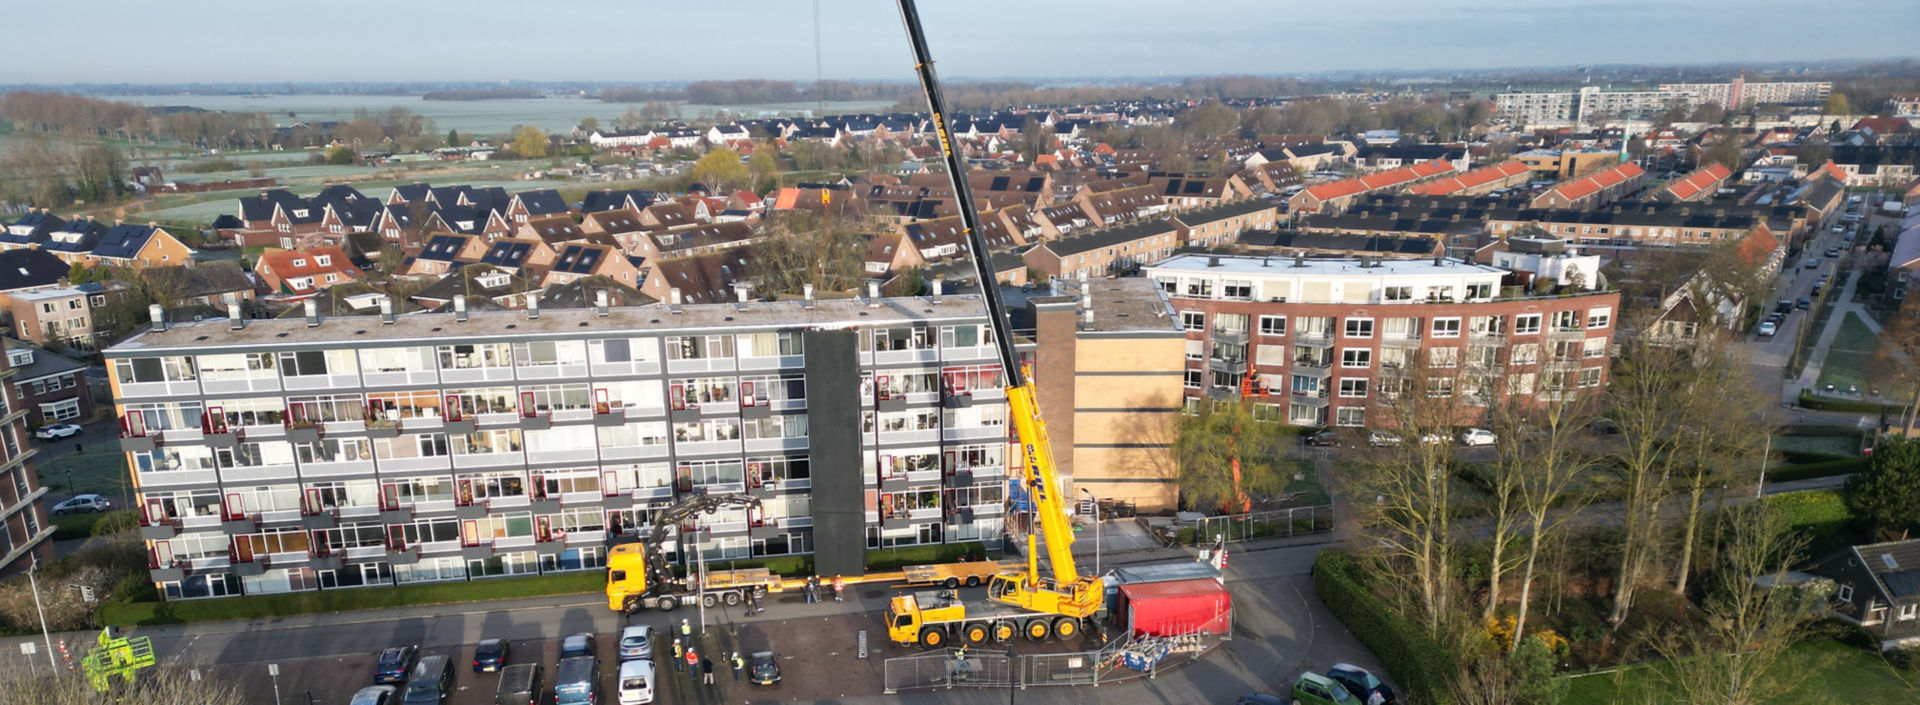 Crane getting ready to lift a prefabricated elevator from a truck in front of a residential building.